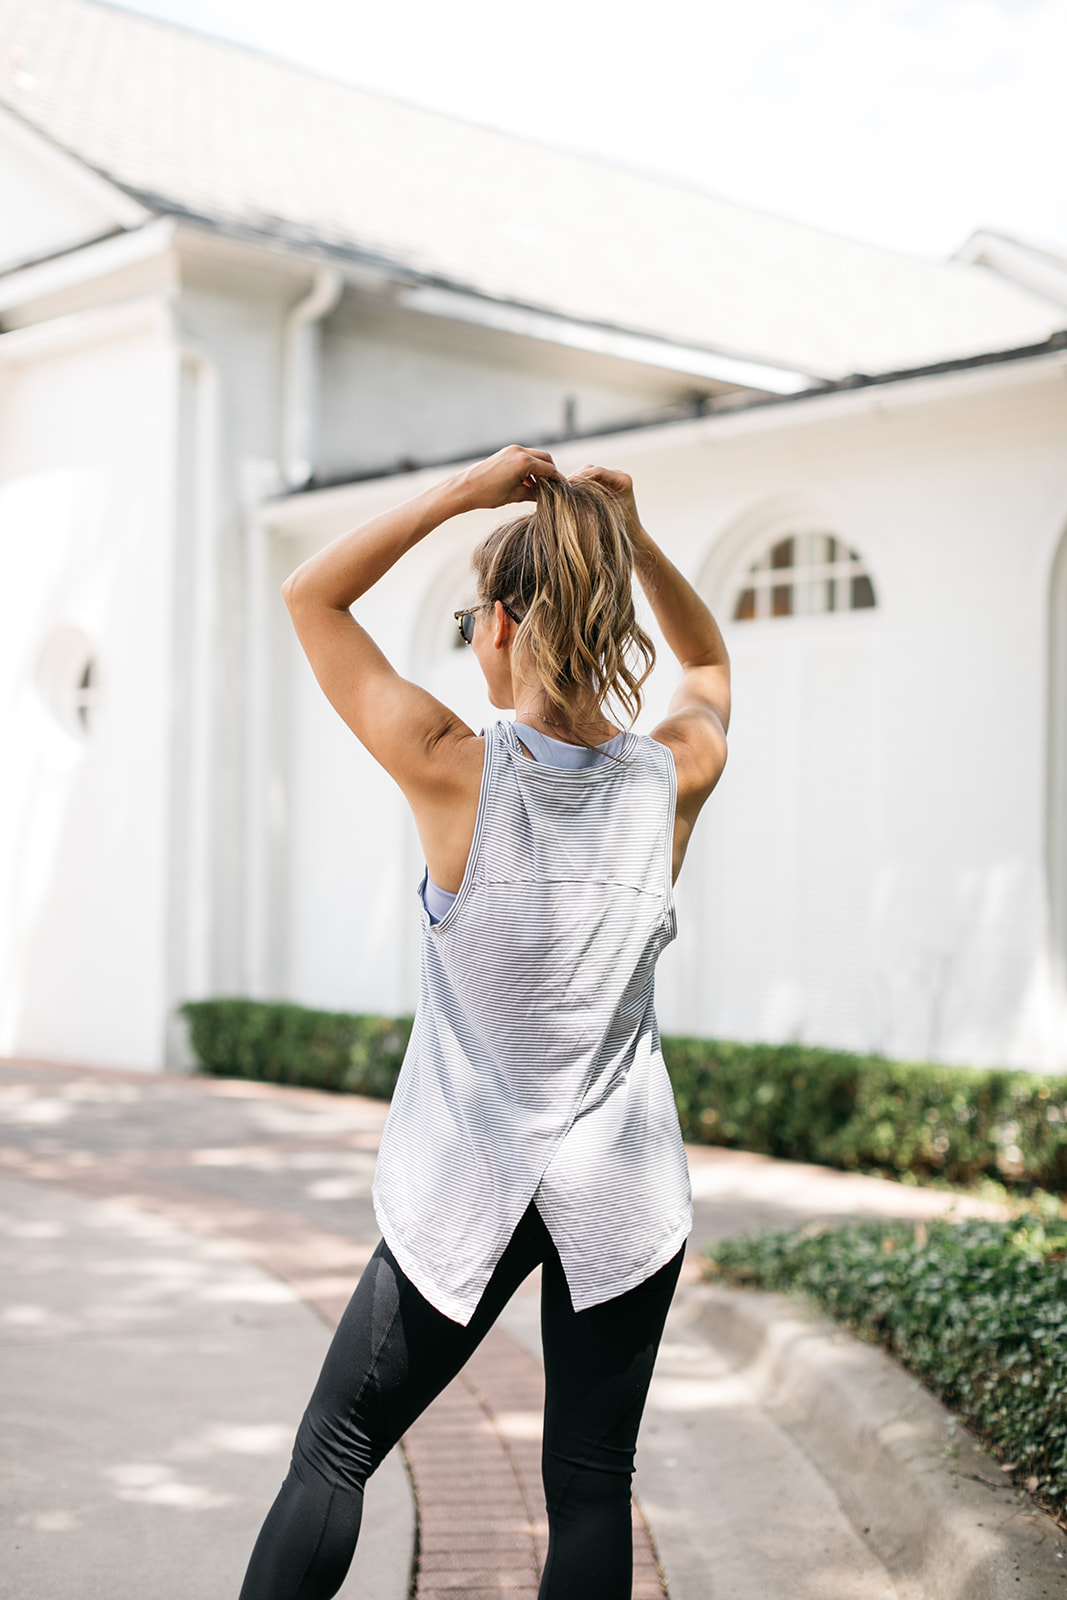 brighton butler wearing nordstrom athleisure white and grey tank with black leggings